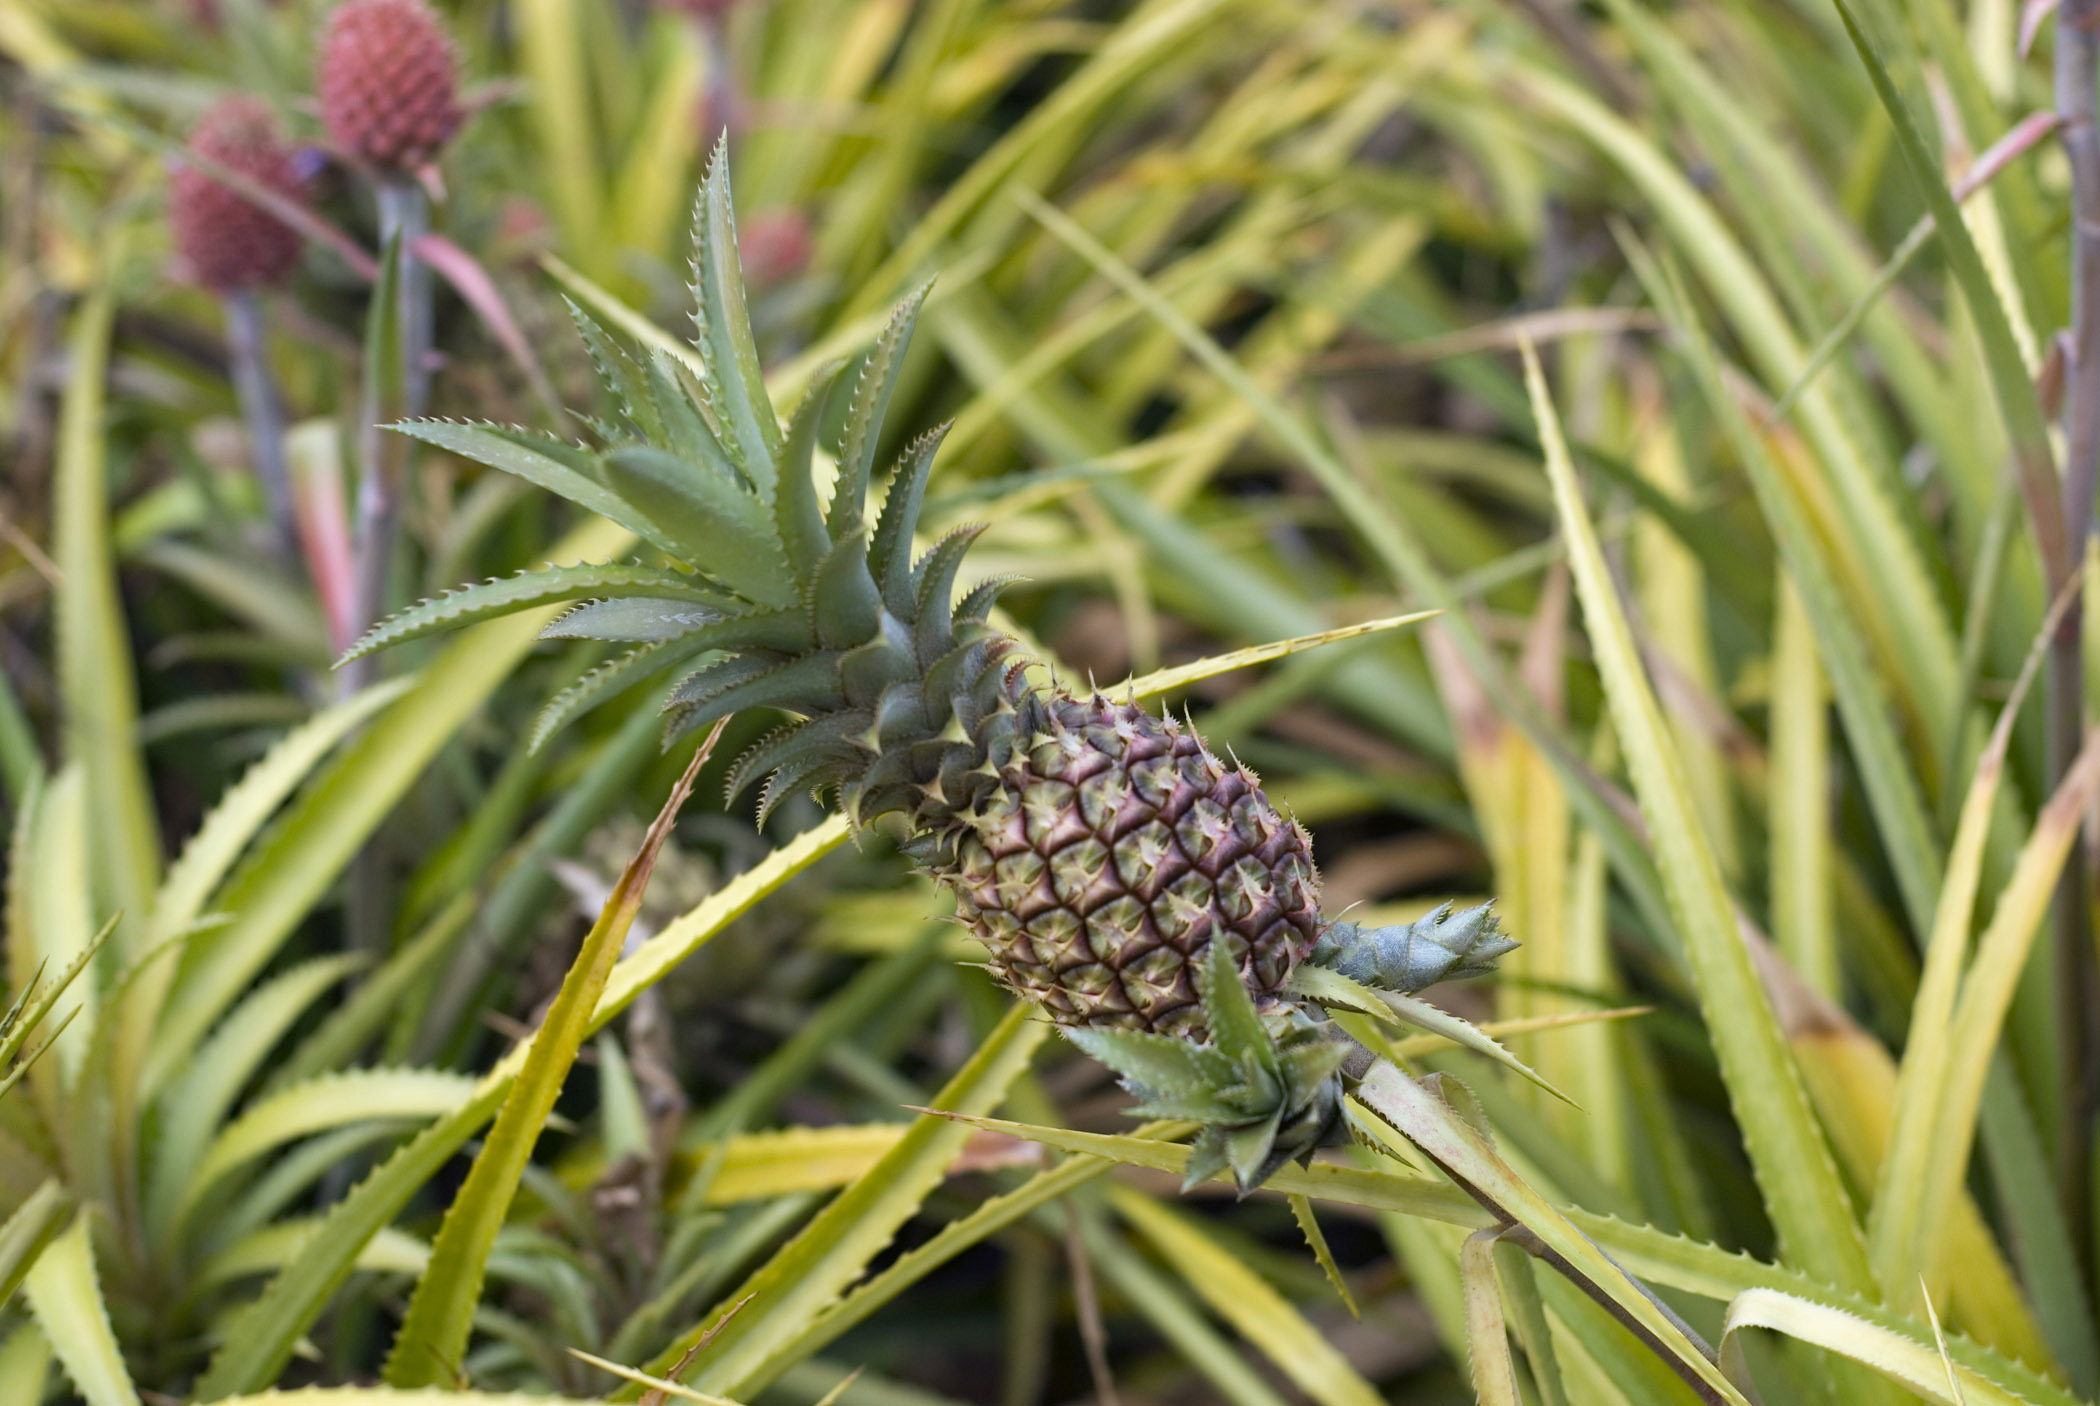  Pineapple - The Tropical Wonder with Digestive Benefits